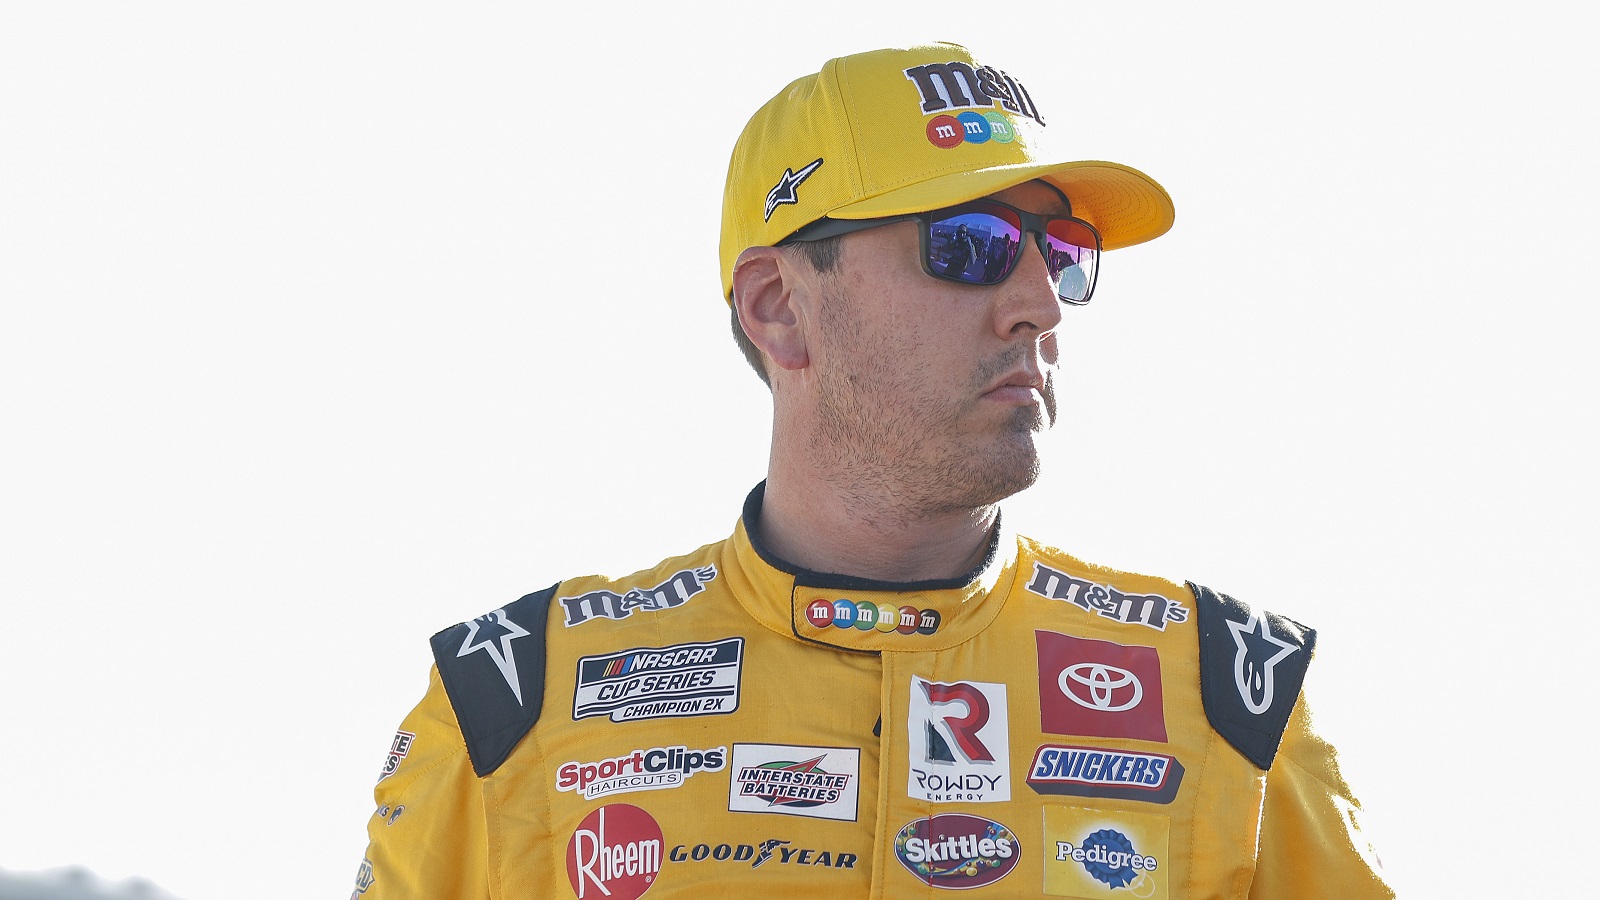 Kyle Busch waits on the grid during practice for the NASCAR Camping World Truck Series Worldwide Express 250 for Carrier Appreciation at Richmond Raceway on Aug. 13, 2022, in Richmond, Virginia. | Jared C. Tilton/Getty Images